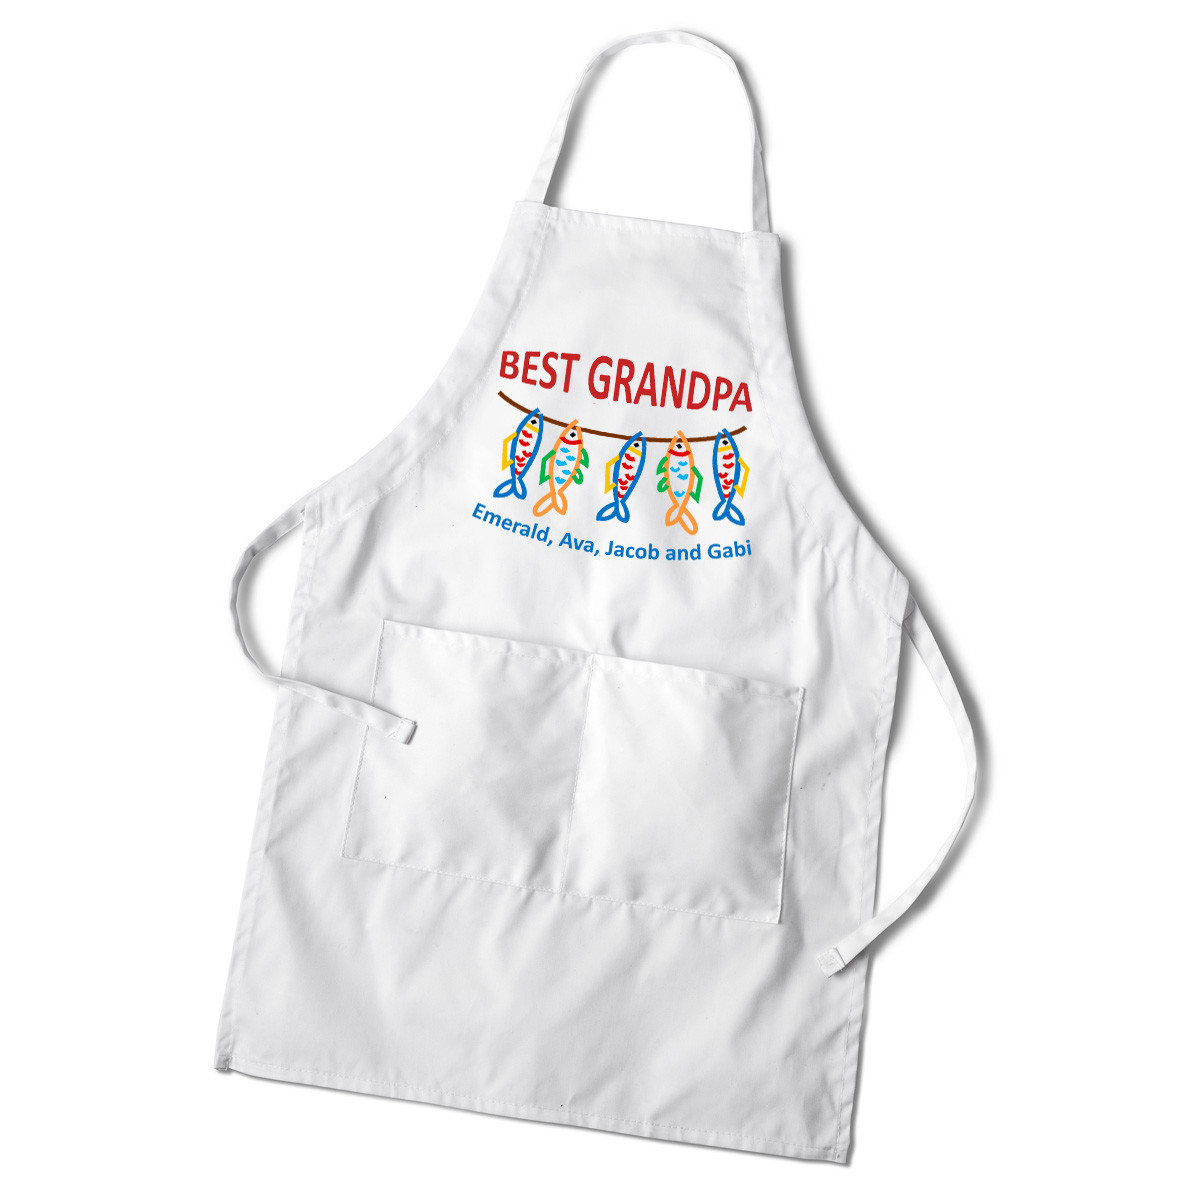 The endearing message reading, "Best Grandpa" is complemented with colorful images of grilled fishes. It includes two front pockets too. An engaging and colorful design of fishes along with the text, Best Grandad adorns this delightful apron. This custom #best